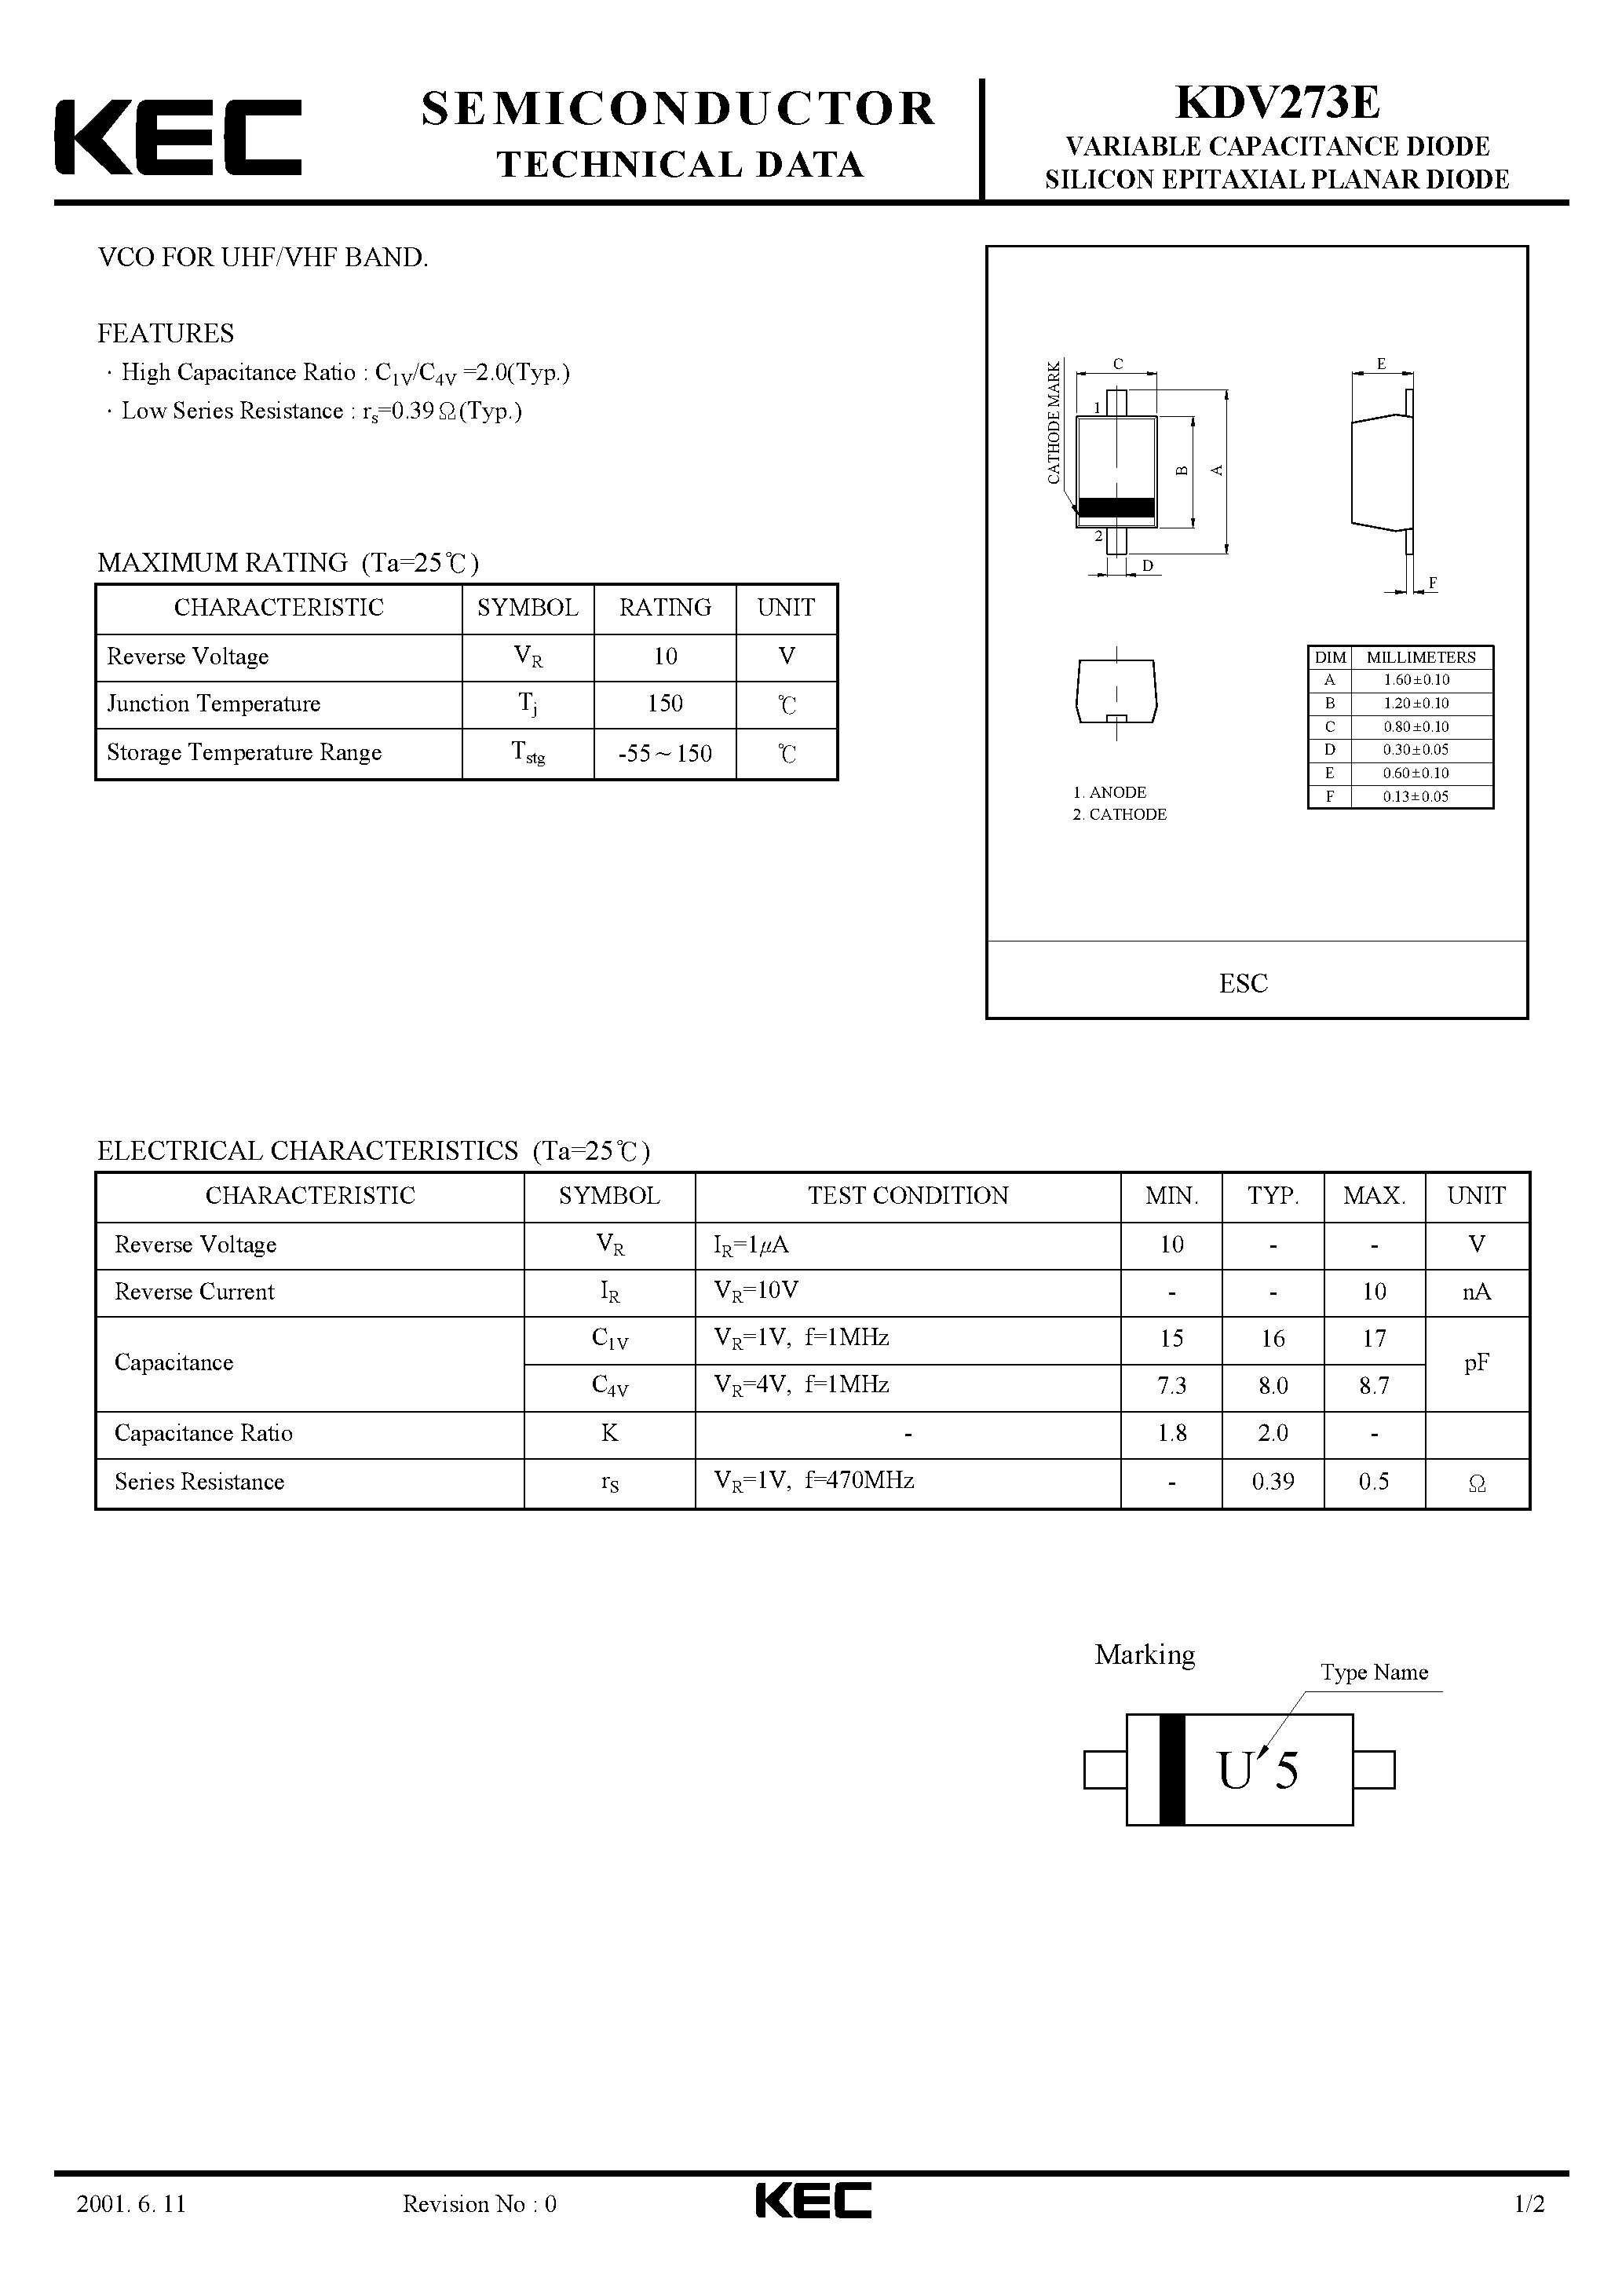 Datasheet KDV273E - VARIABLE CAPACITANCE DIODE SILICON EPITAXIAL PLANAR DIODE(VCO FOR UHF/VHF BAND) page 1